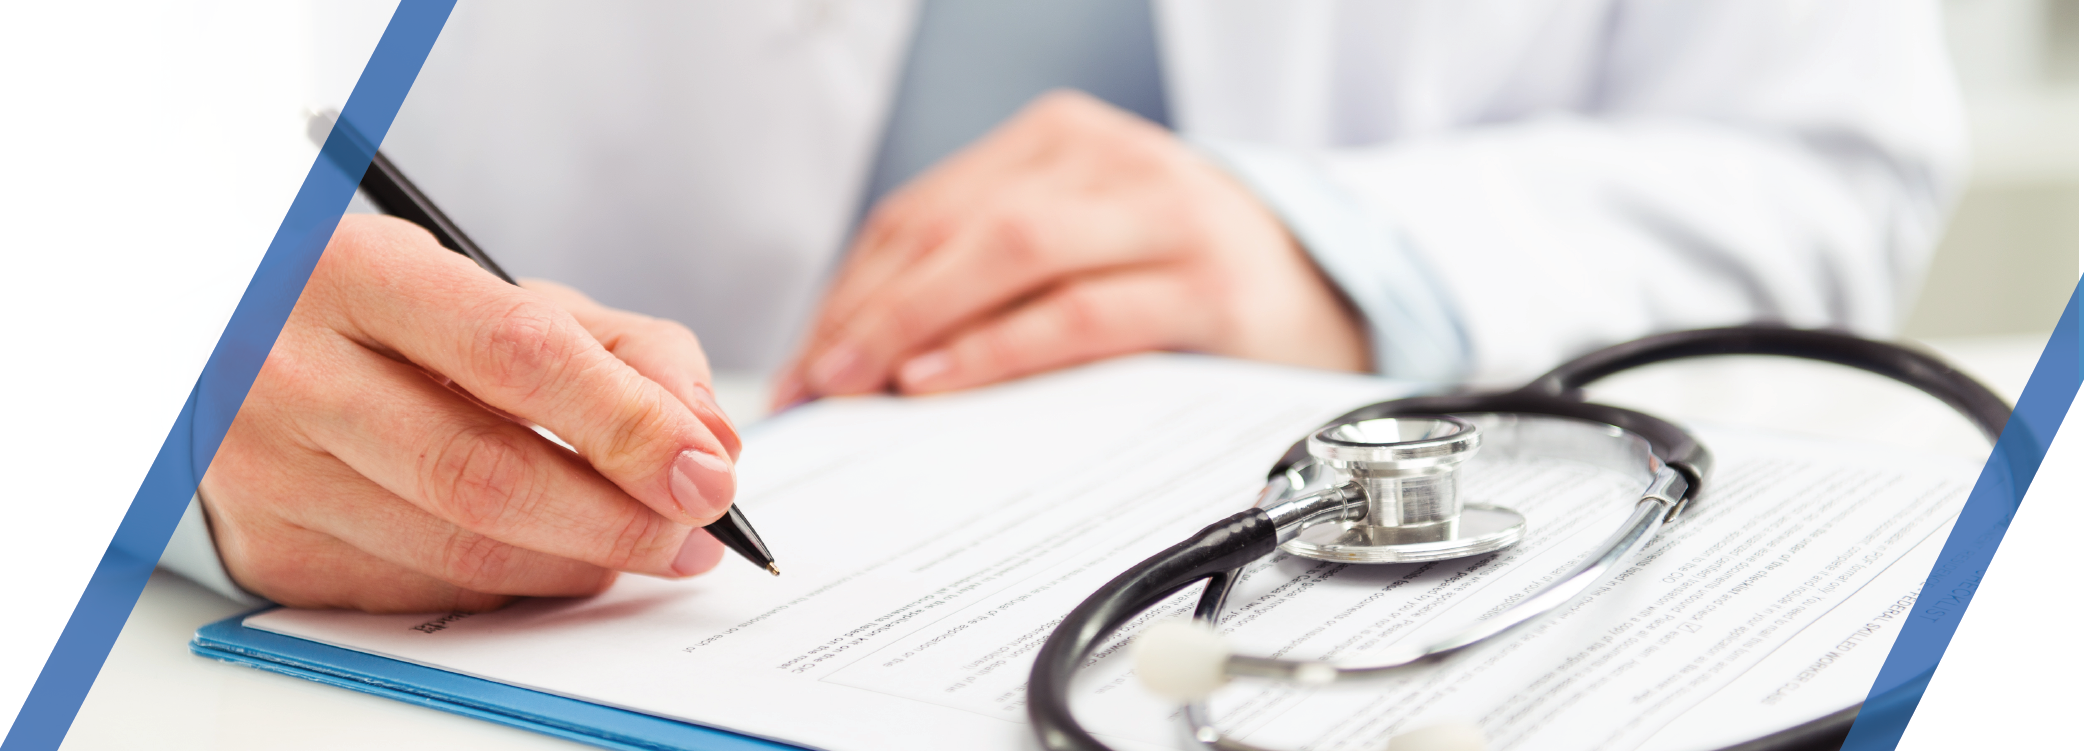 Healthcare Industry May be Impacted by FTC Proposed Rule Prohibiting the Enforcement of Non-Compete Agreements by Employers